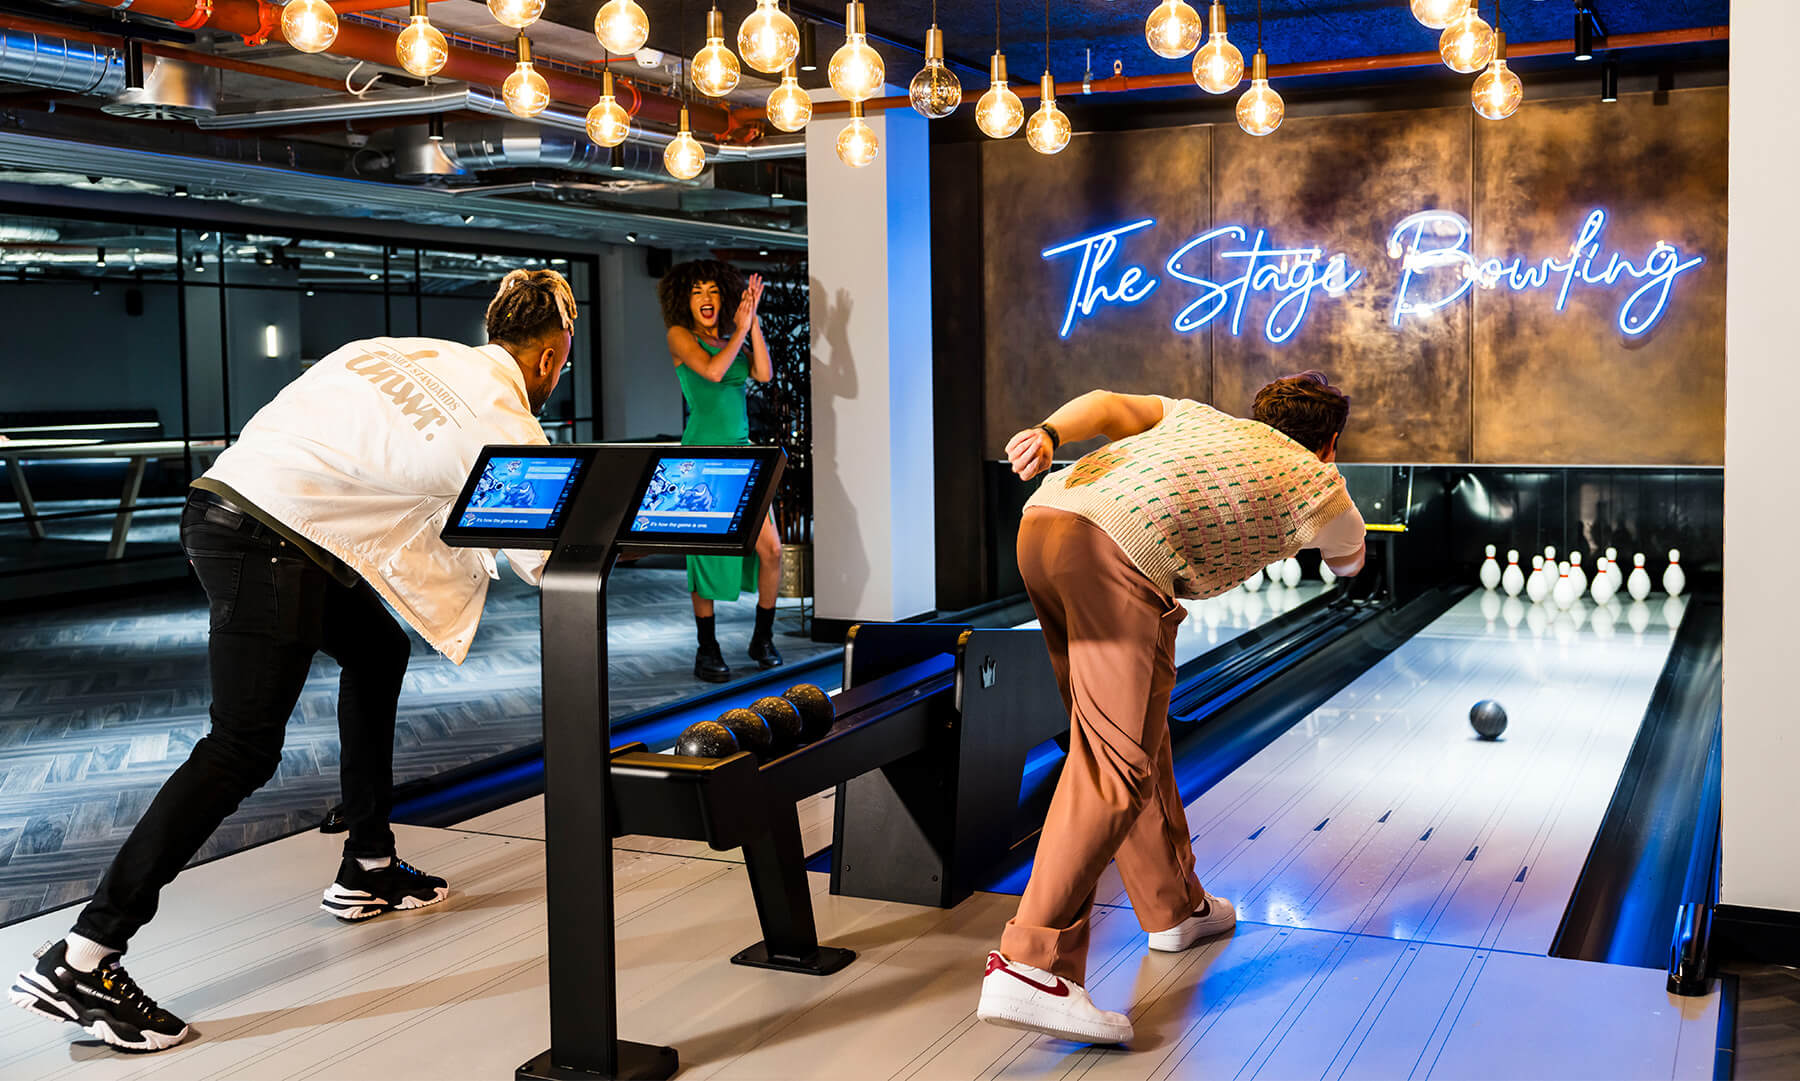 Residents bowling at The Stage Apartments in Shoreditch